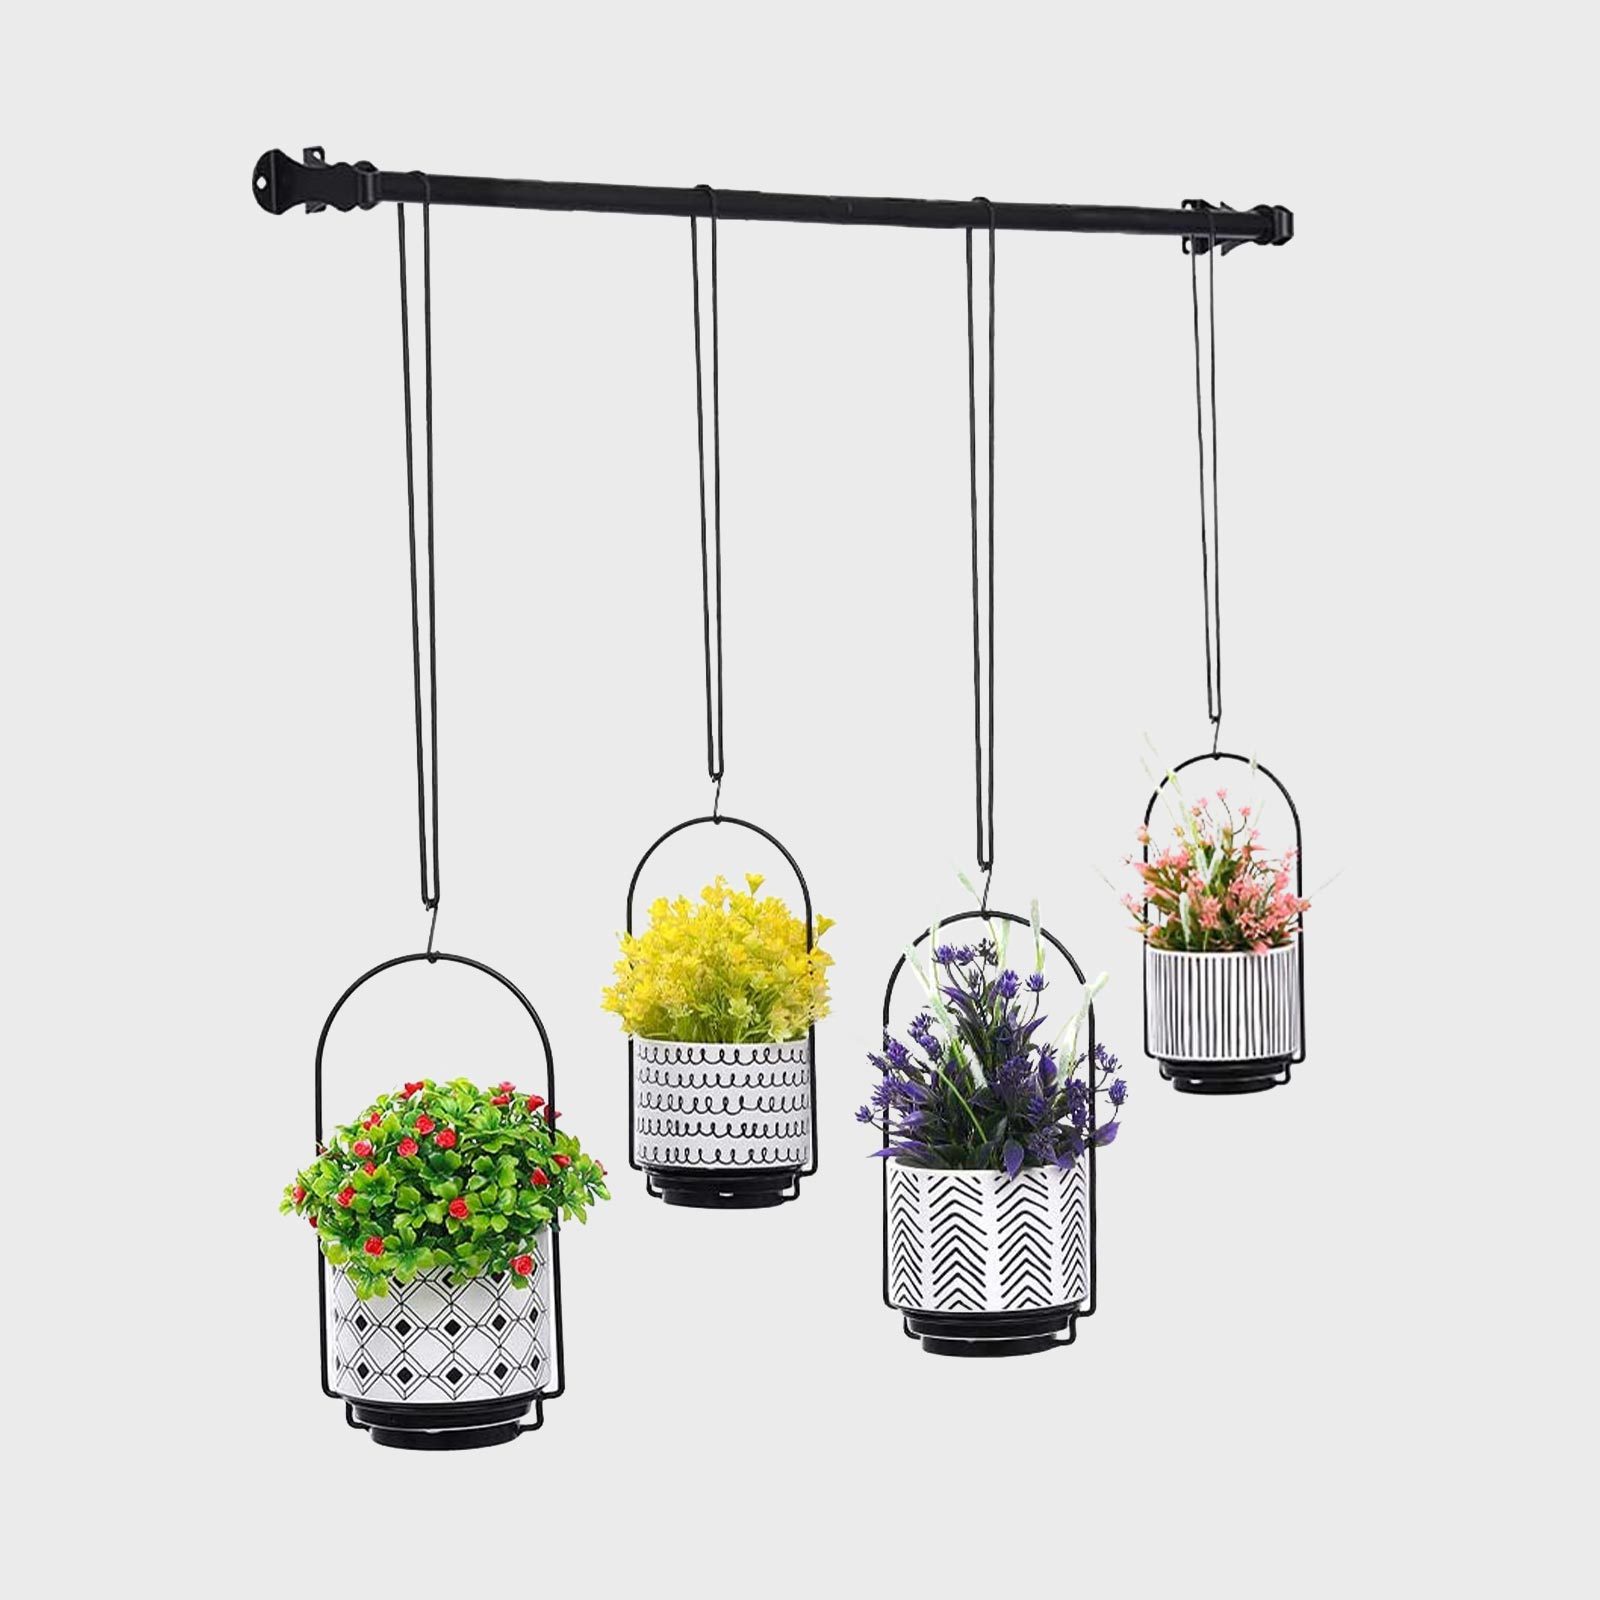 Casewin Hanging Planters